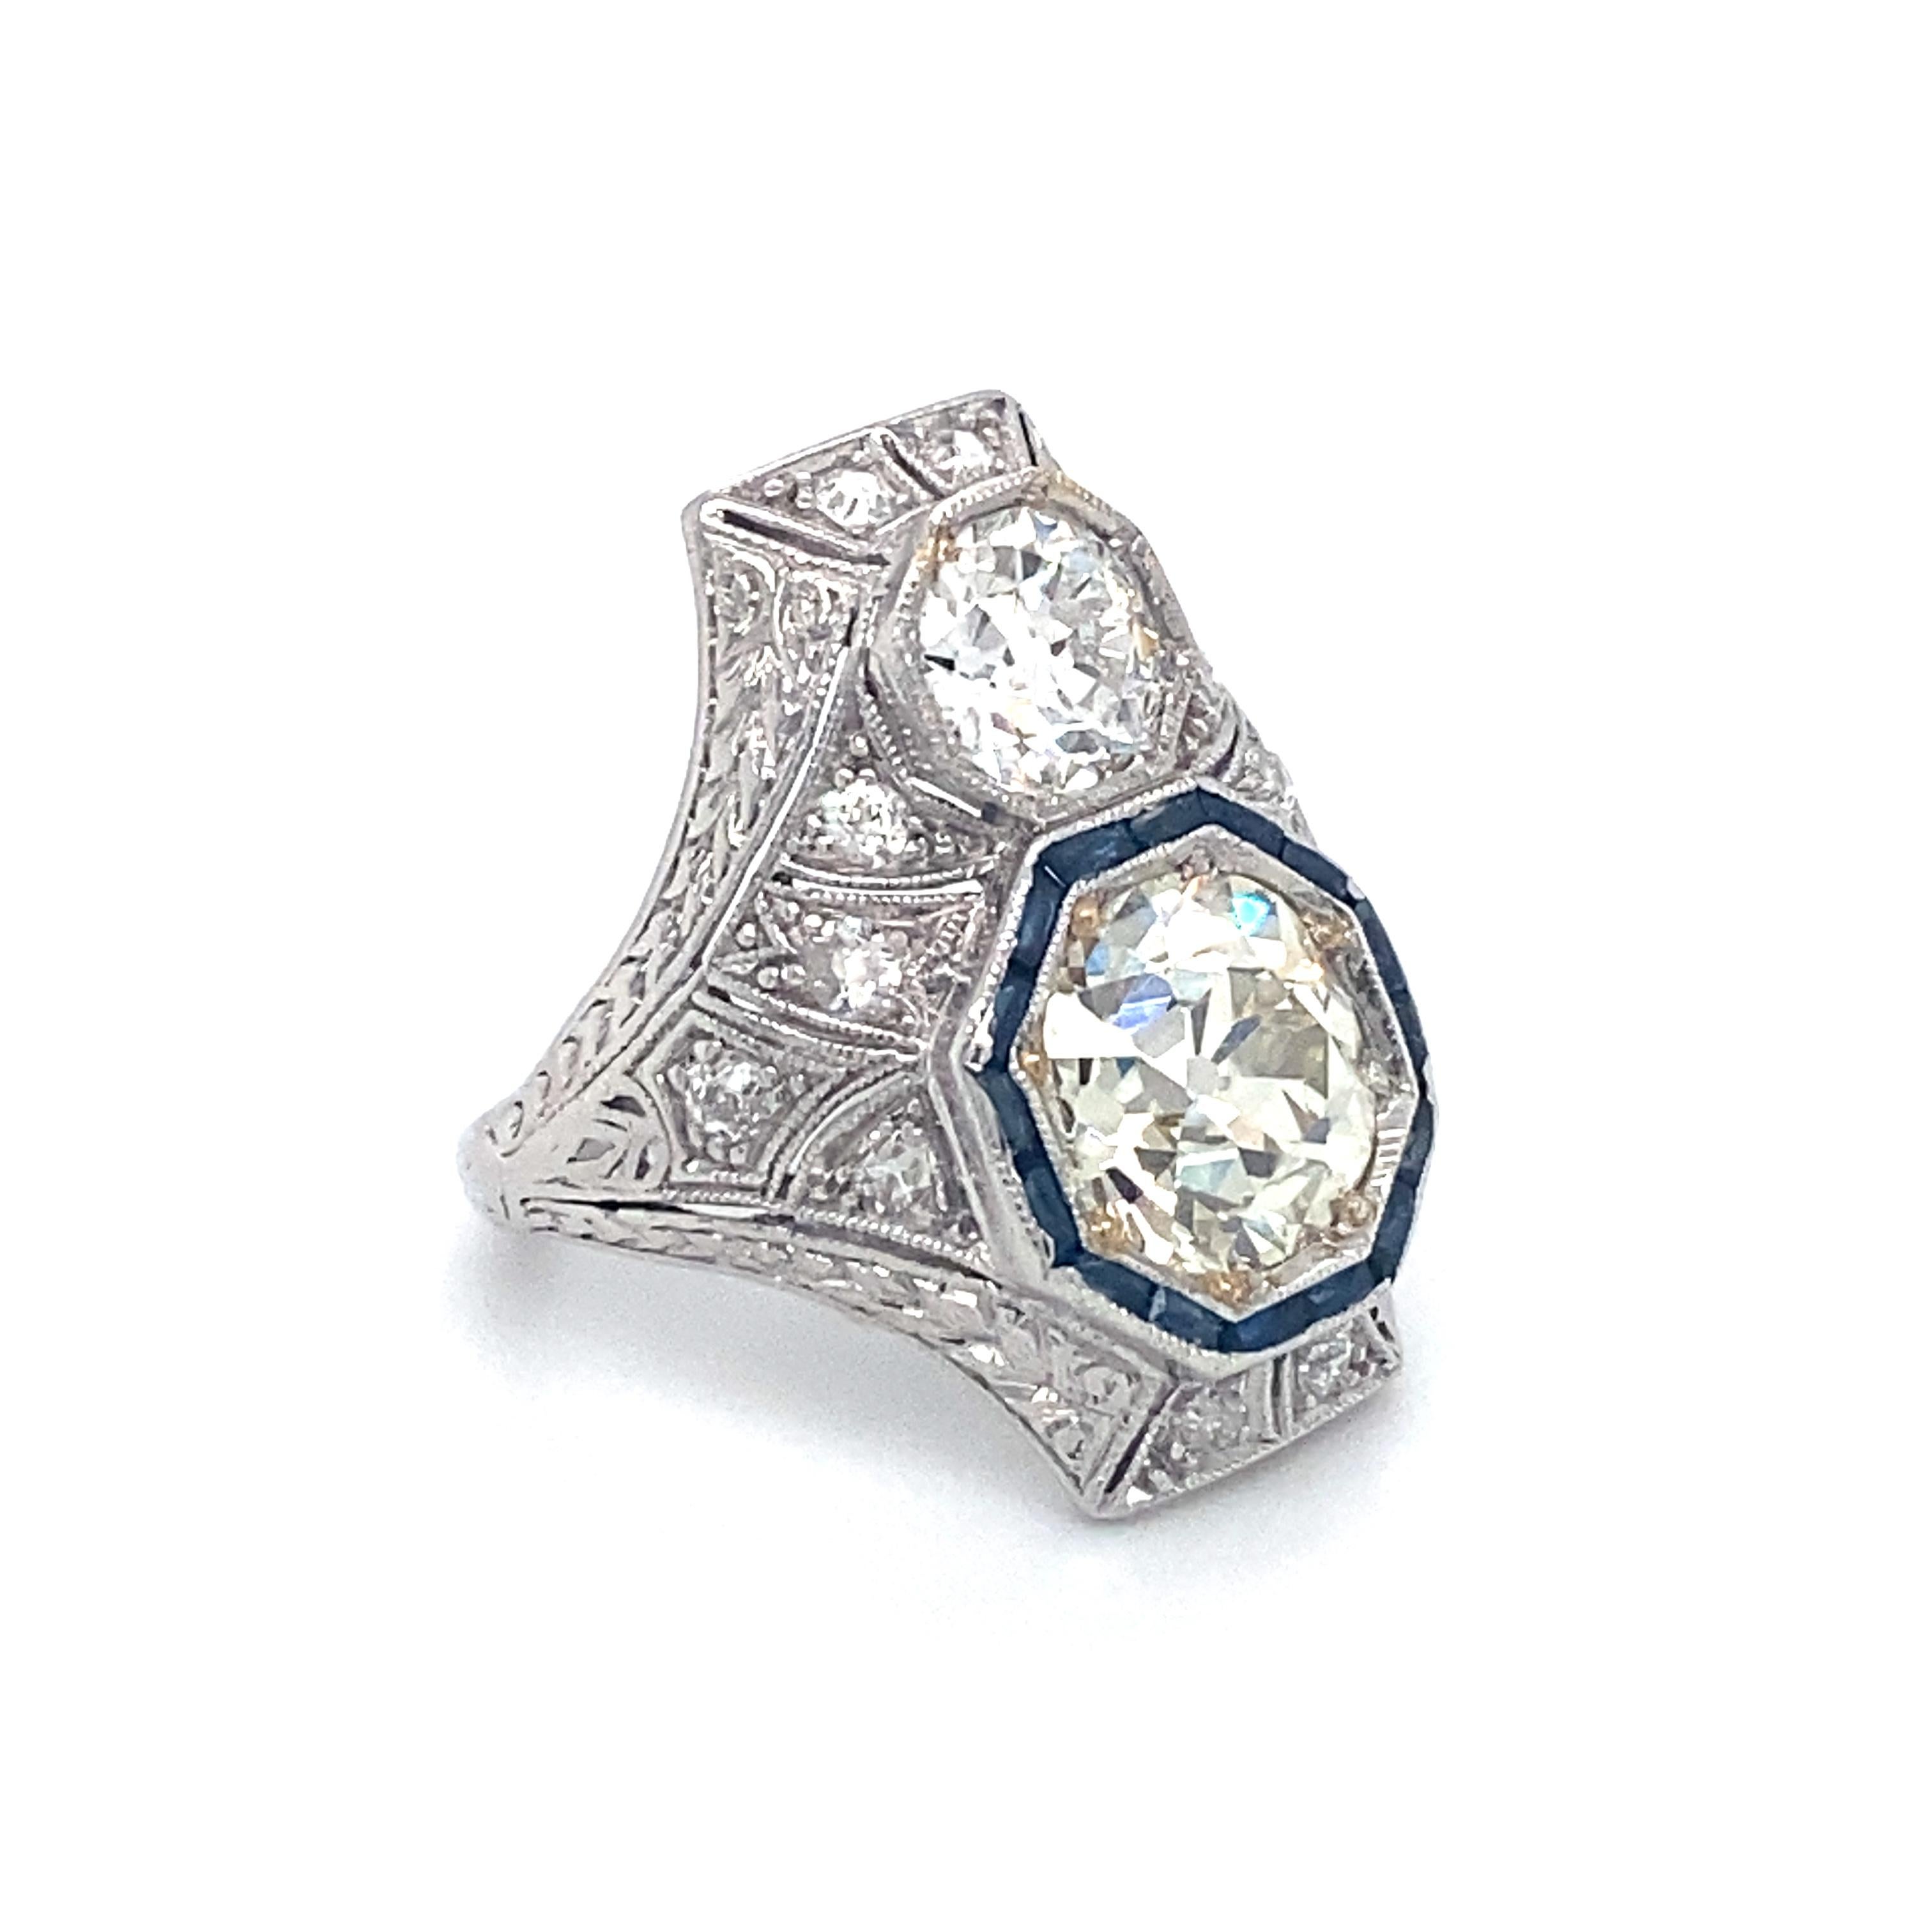 Old European Cut 1920s Art Deco 3.70 Carat Total Diamond and Sapphire Cocktail Ring in Platinum For Sale